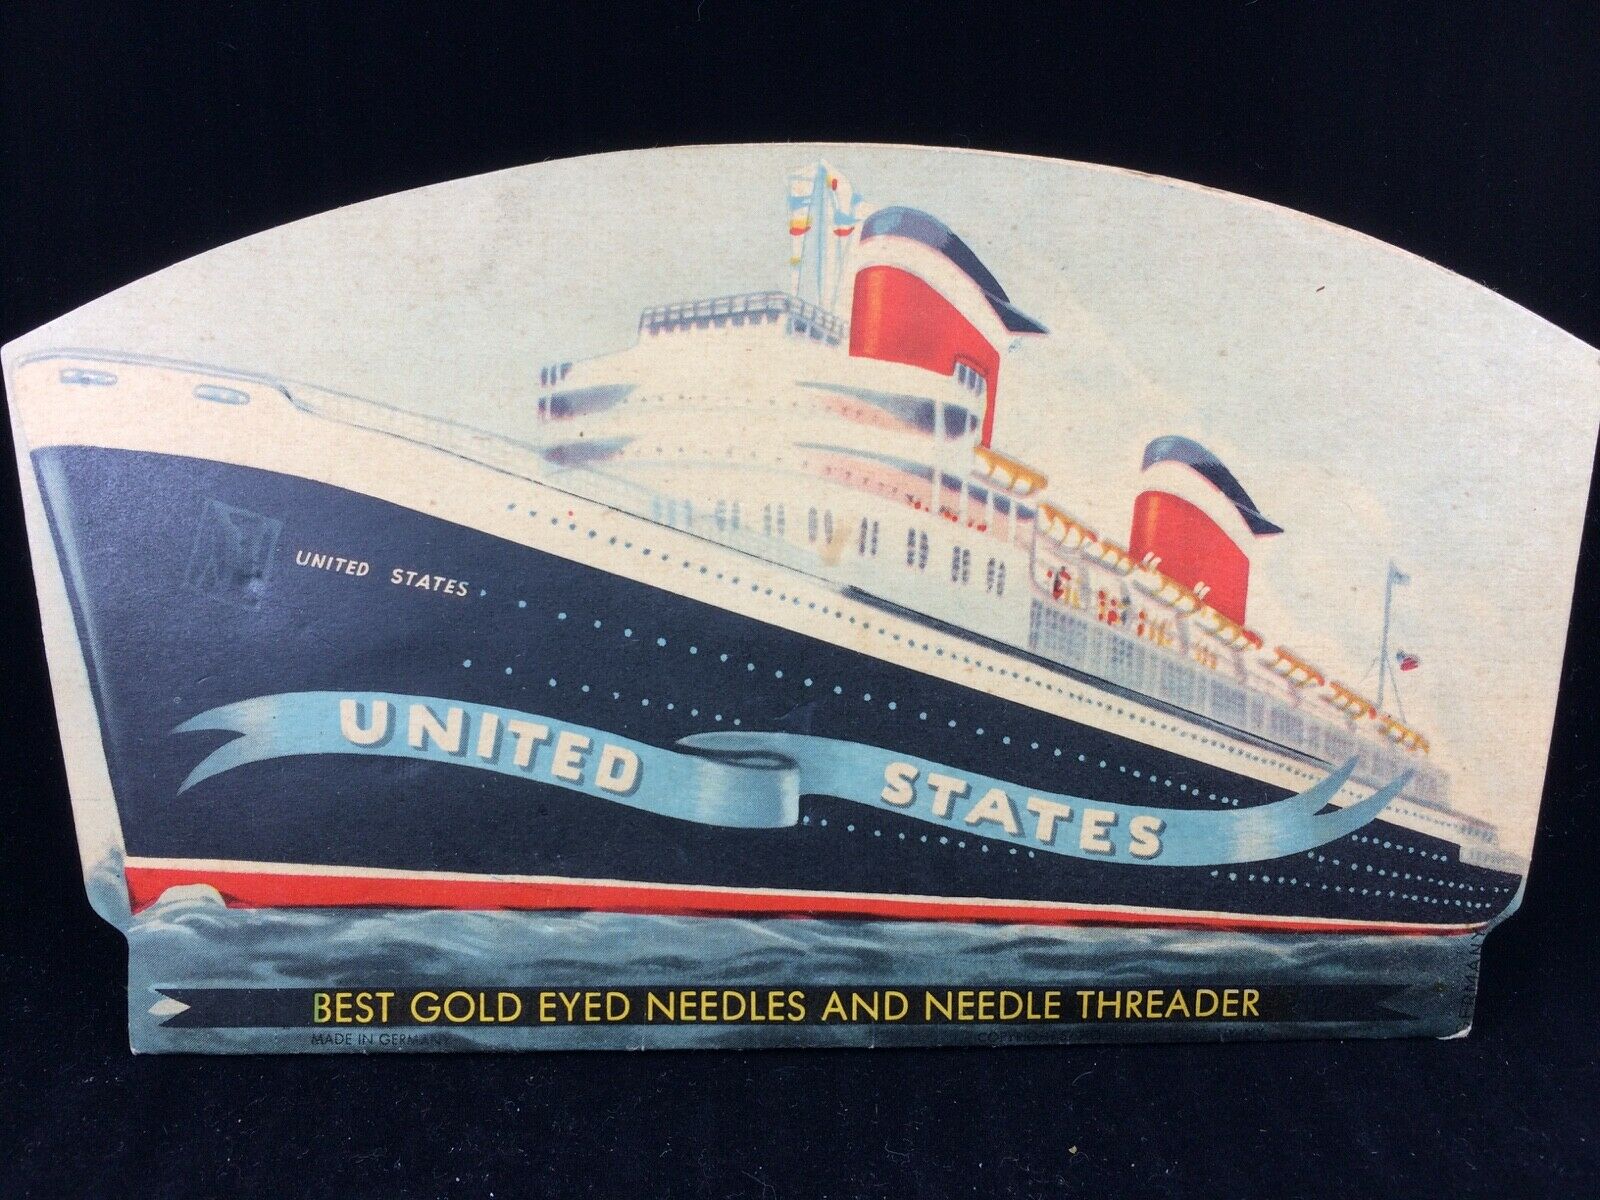 United States Gold Eye Needle Ship Card Vintage Red White Blue Ship 40's Look